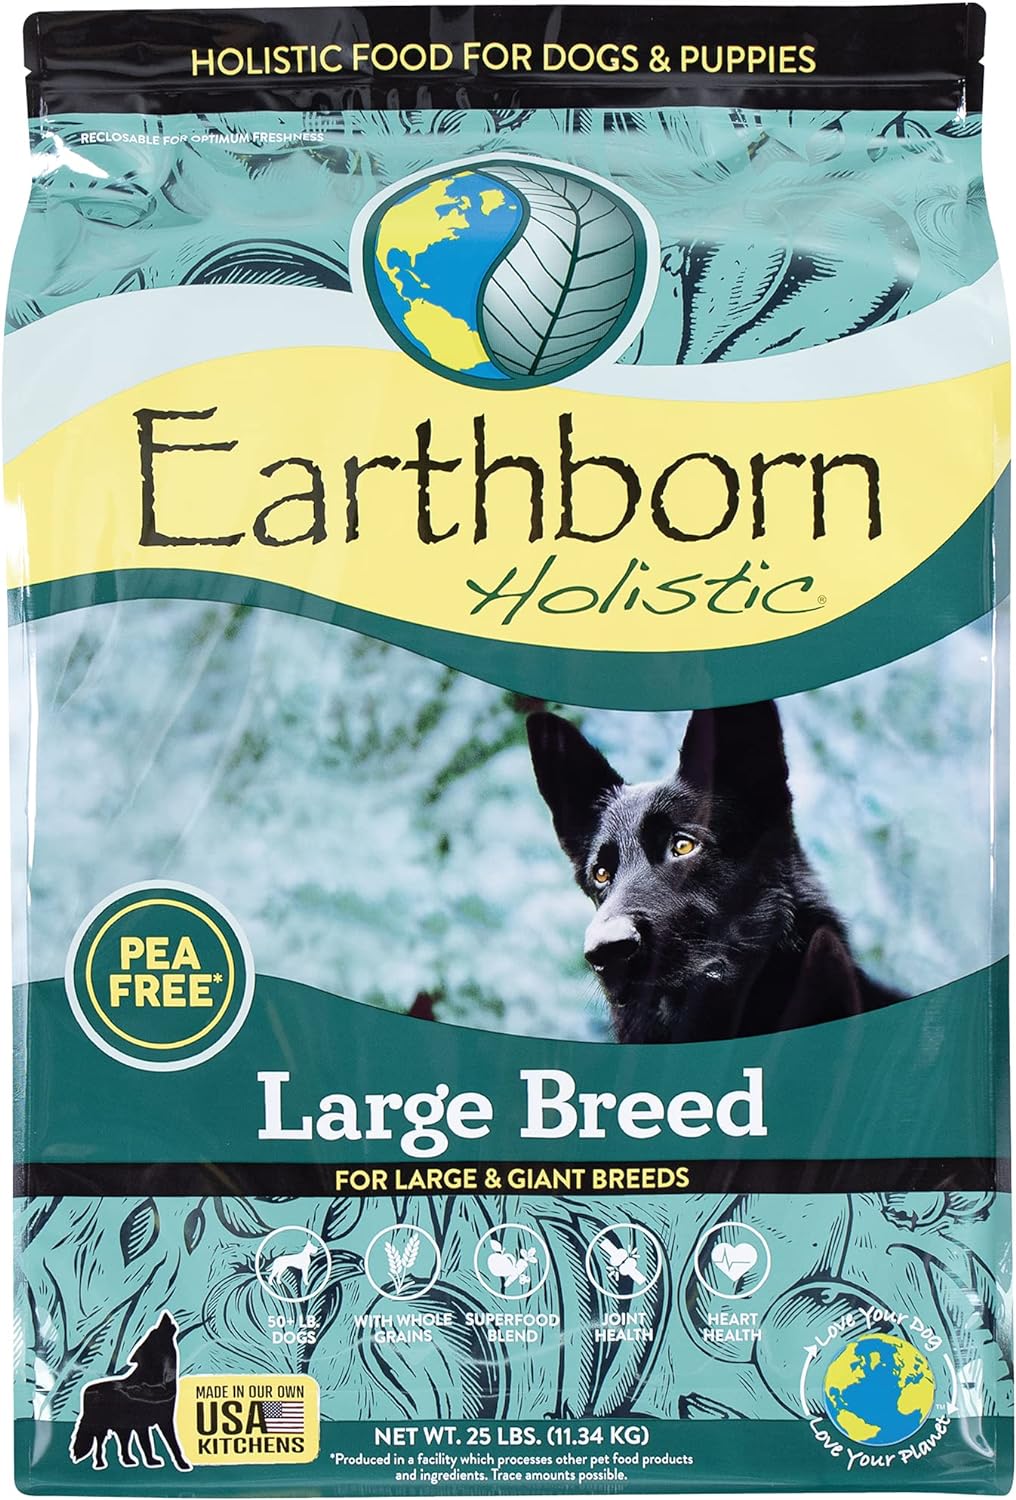 Earthborn Holistic Large Breed Dry Dog Food – Gallery Image 1